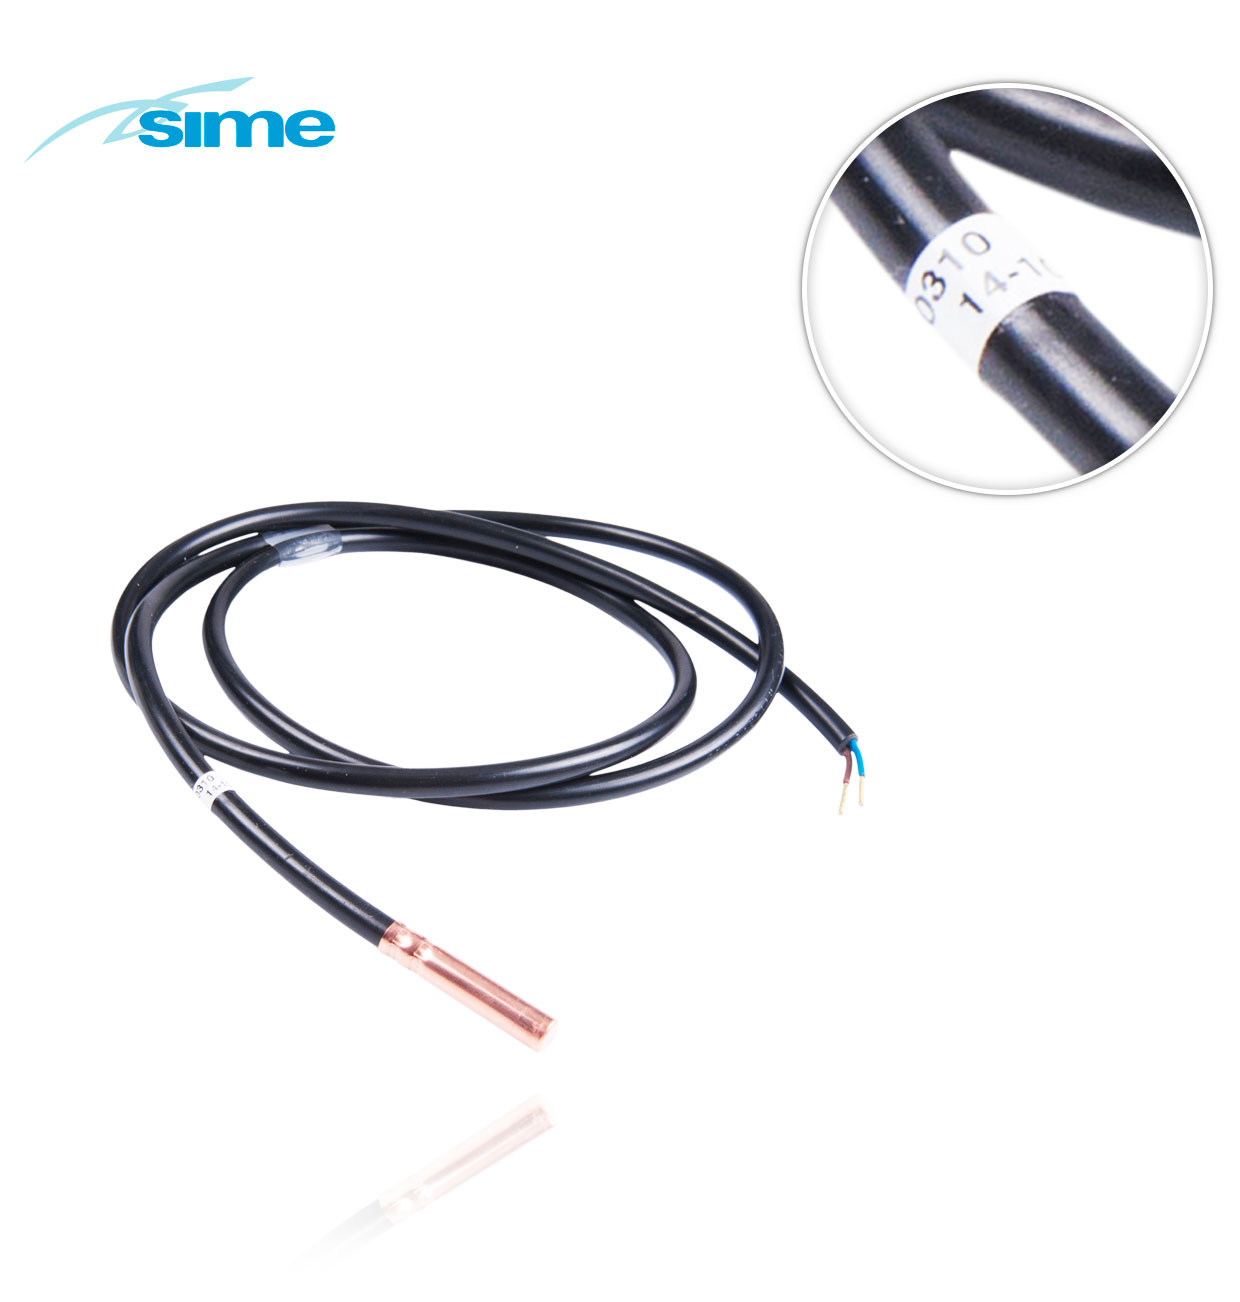 TEMPERATURE PROBE for SIME FORMAT 6231330 length 1120/ COINTRA/ ROCA